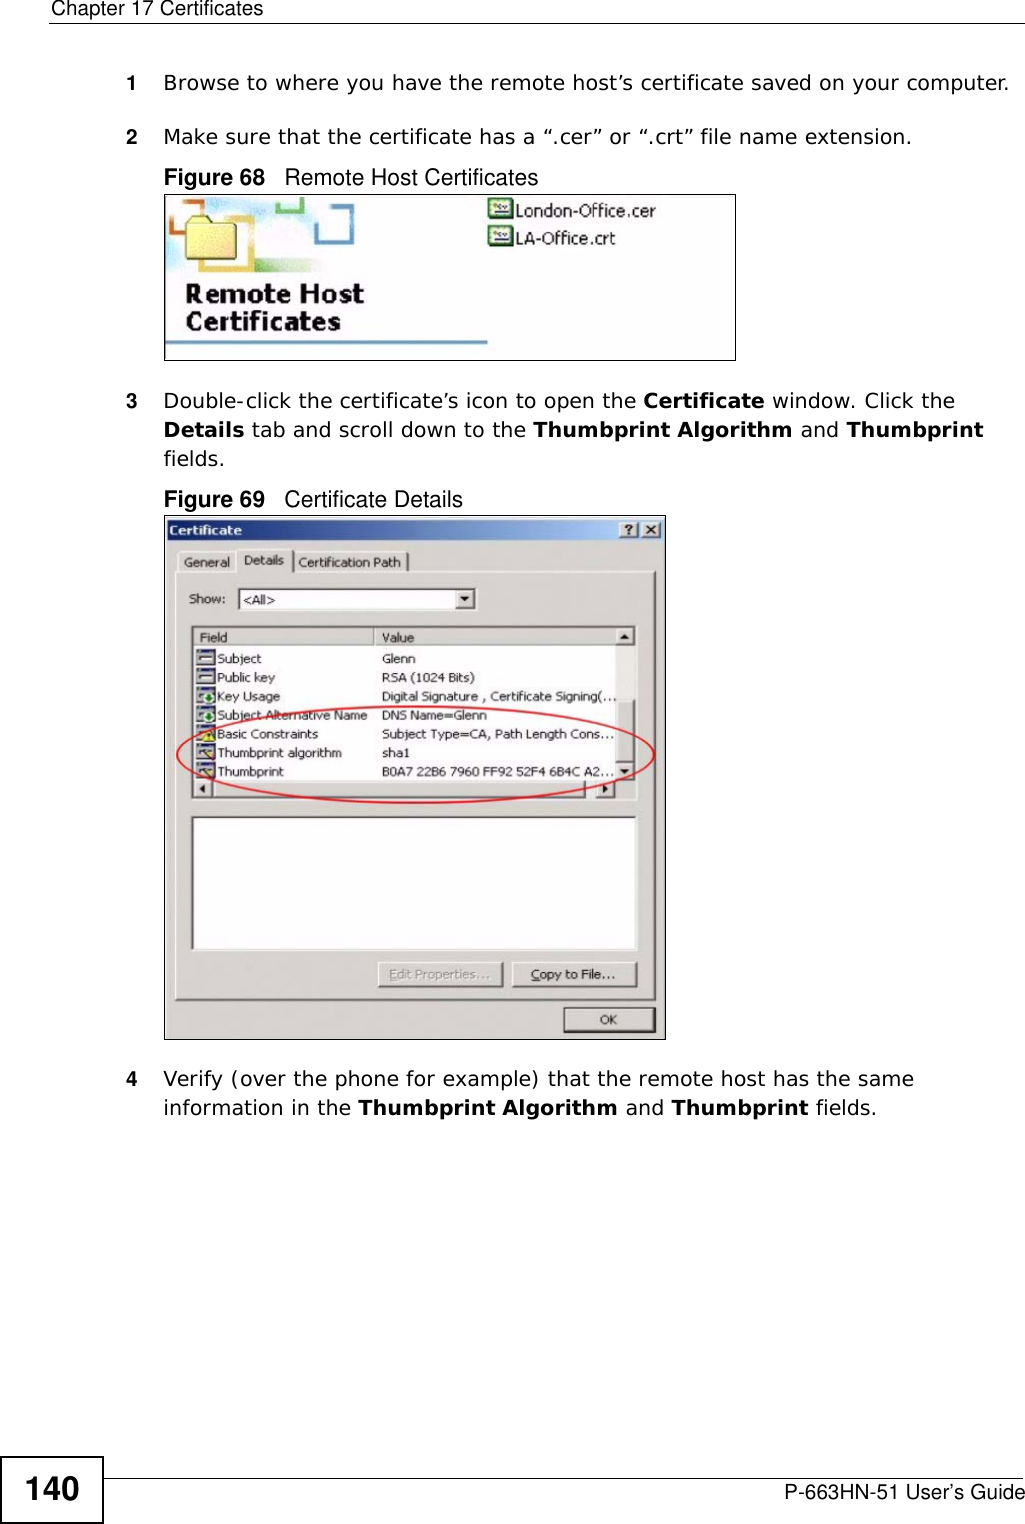 Chapter 17 CertificatesP-663HN-51 User’s Guide1401Browse to where you have the remote host’s certificate saved on your computer. 2Make sure that the certificate has a “.cer” or “.crt” file name extension.Figure 68   Remote Host Certificates3Double-click the certificate’s icon to open the Certificate window. Click the Details tab and scroll down to the Thumbprint Algorithm and Thumbprint fields.Figure 69   Certificate Details 4Verify (over the phone for example) that the remote host has the same information in the Thumbprint Algorithm and Thumbprint fields.